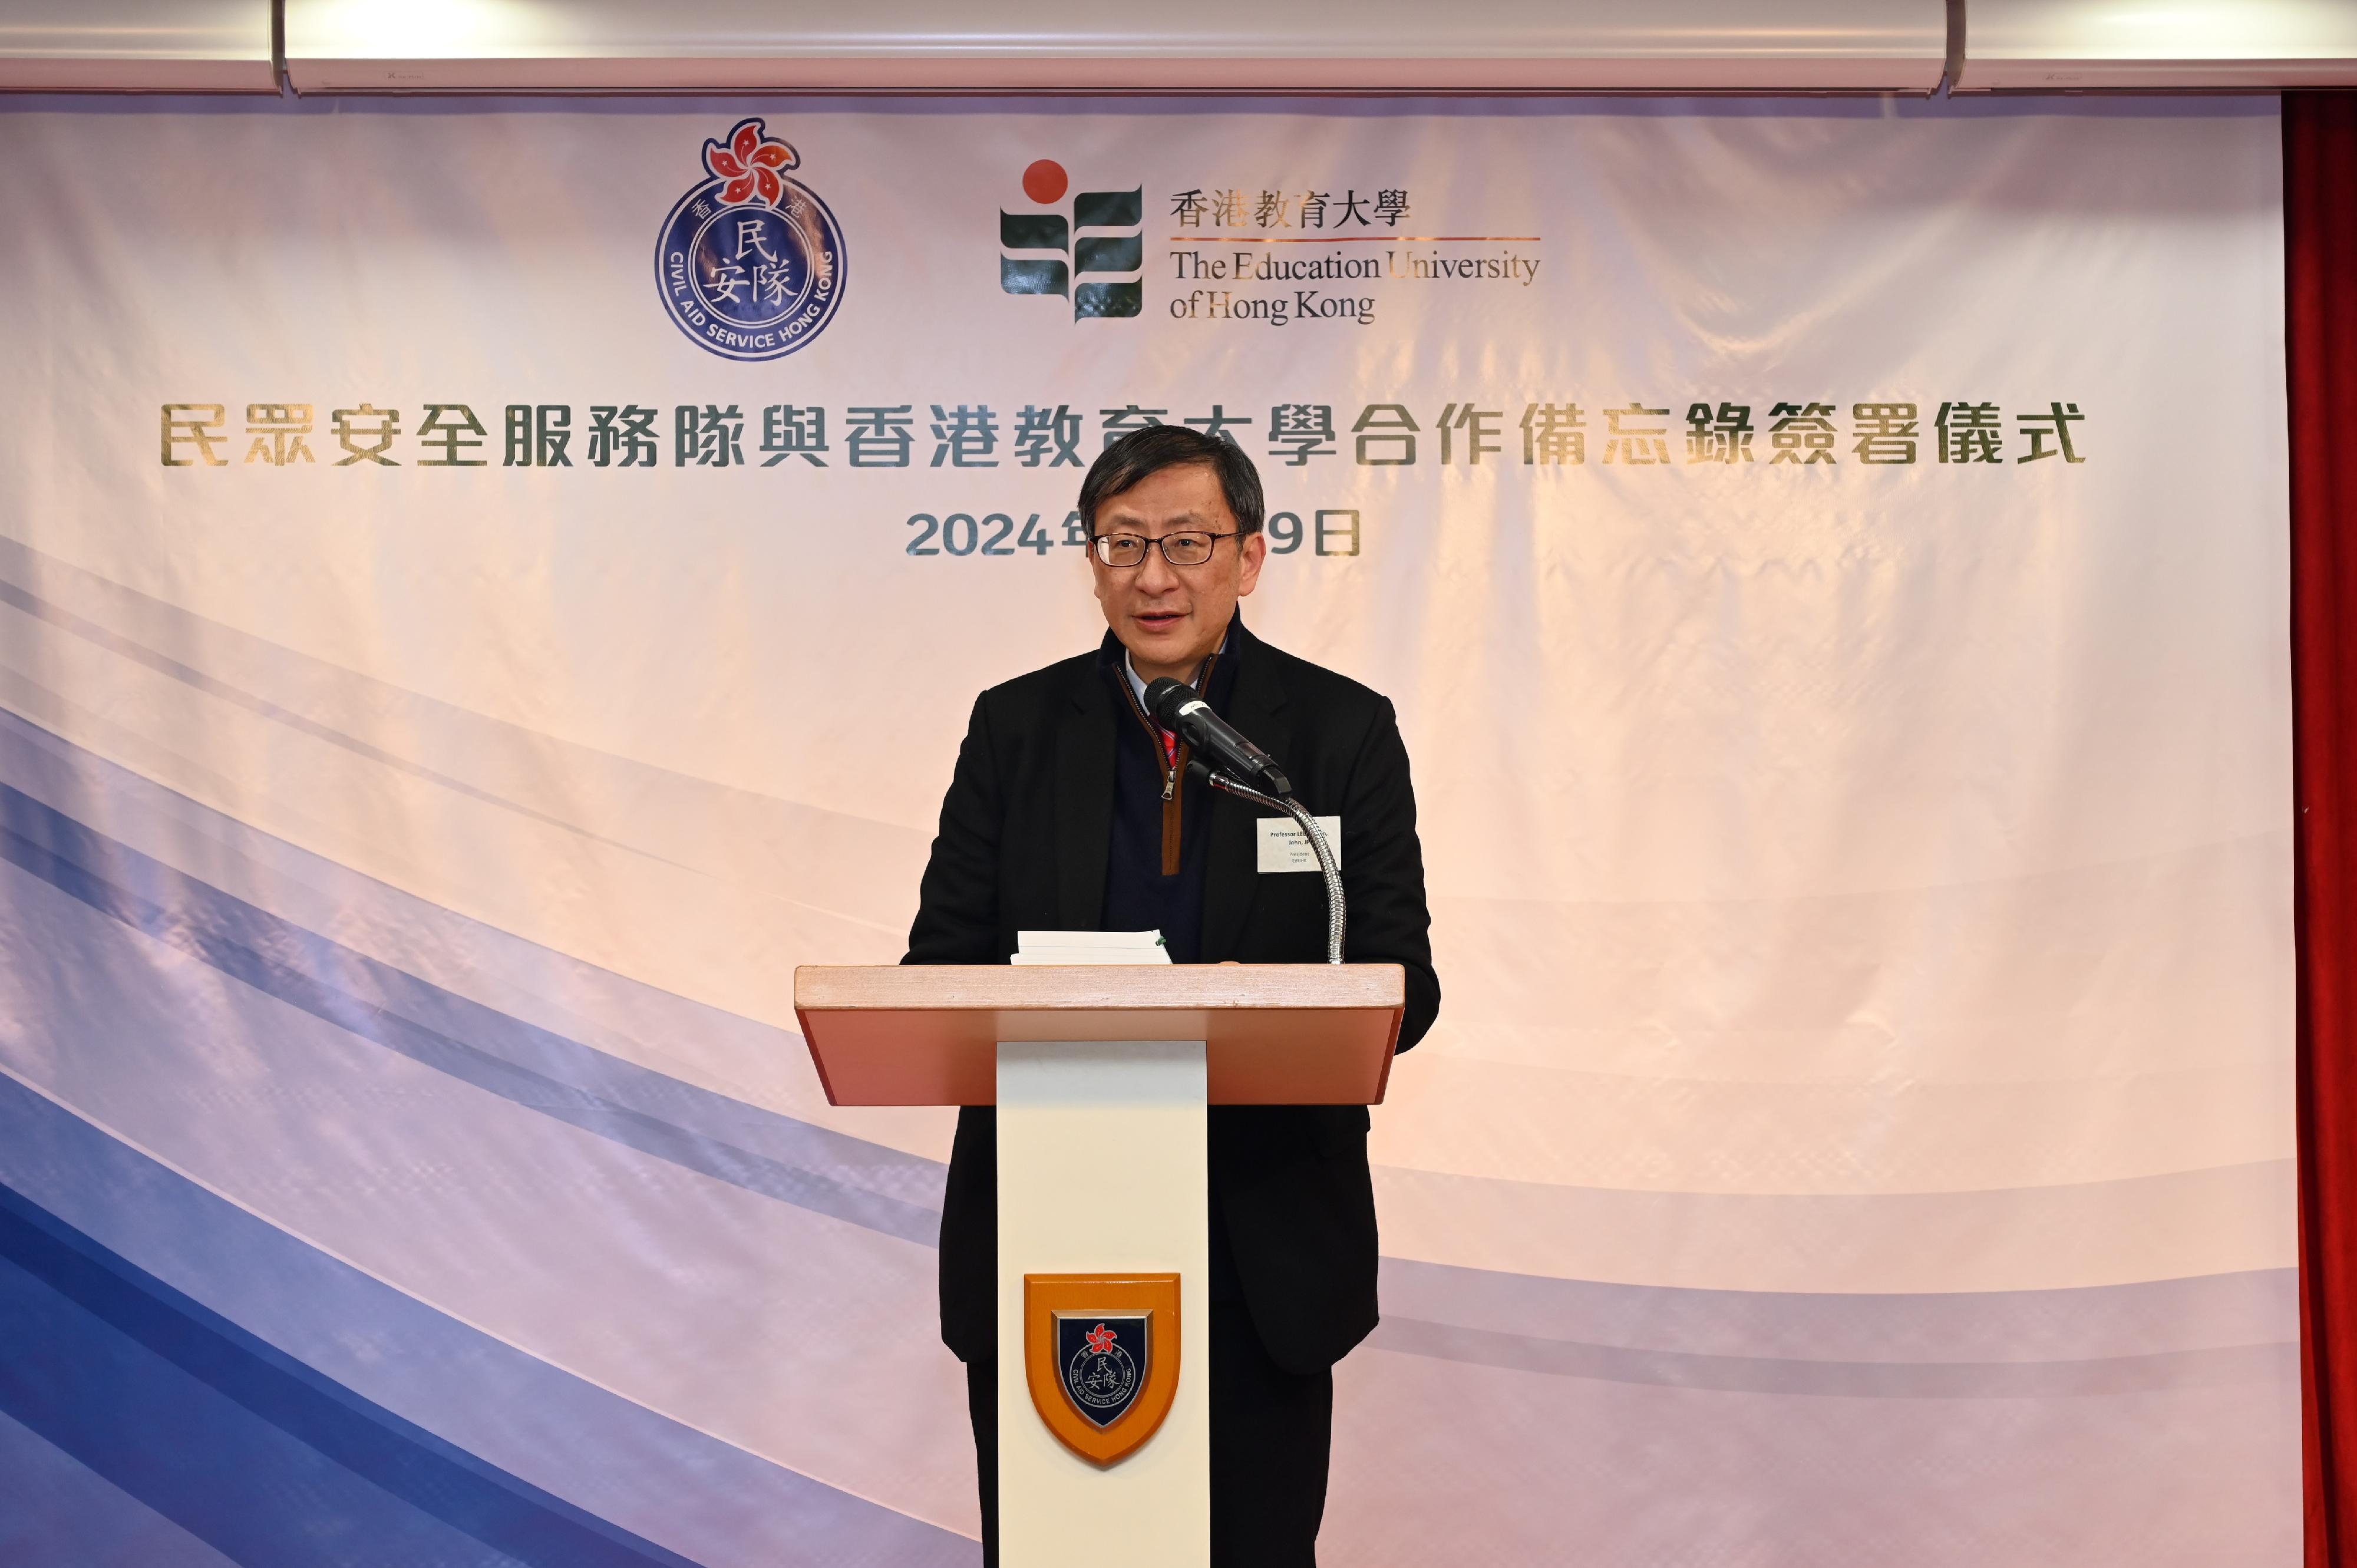 The Civil Aid Service and the Education University of Hong Kong (EdUHK) signed a Memorandum of Understanding today (January 29) to underpin a closer collaboration. Photo shows the President of EdUHK, Professor John Lee, delivering a speech at the signing ceremony.